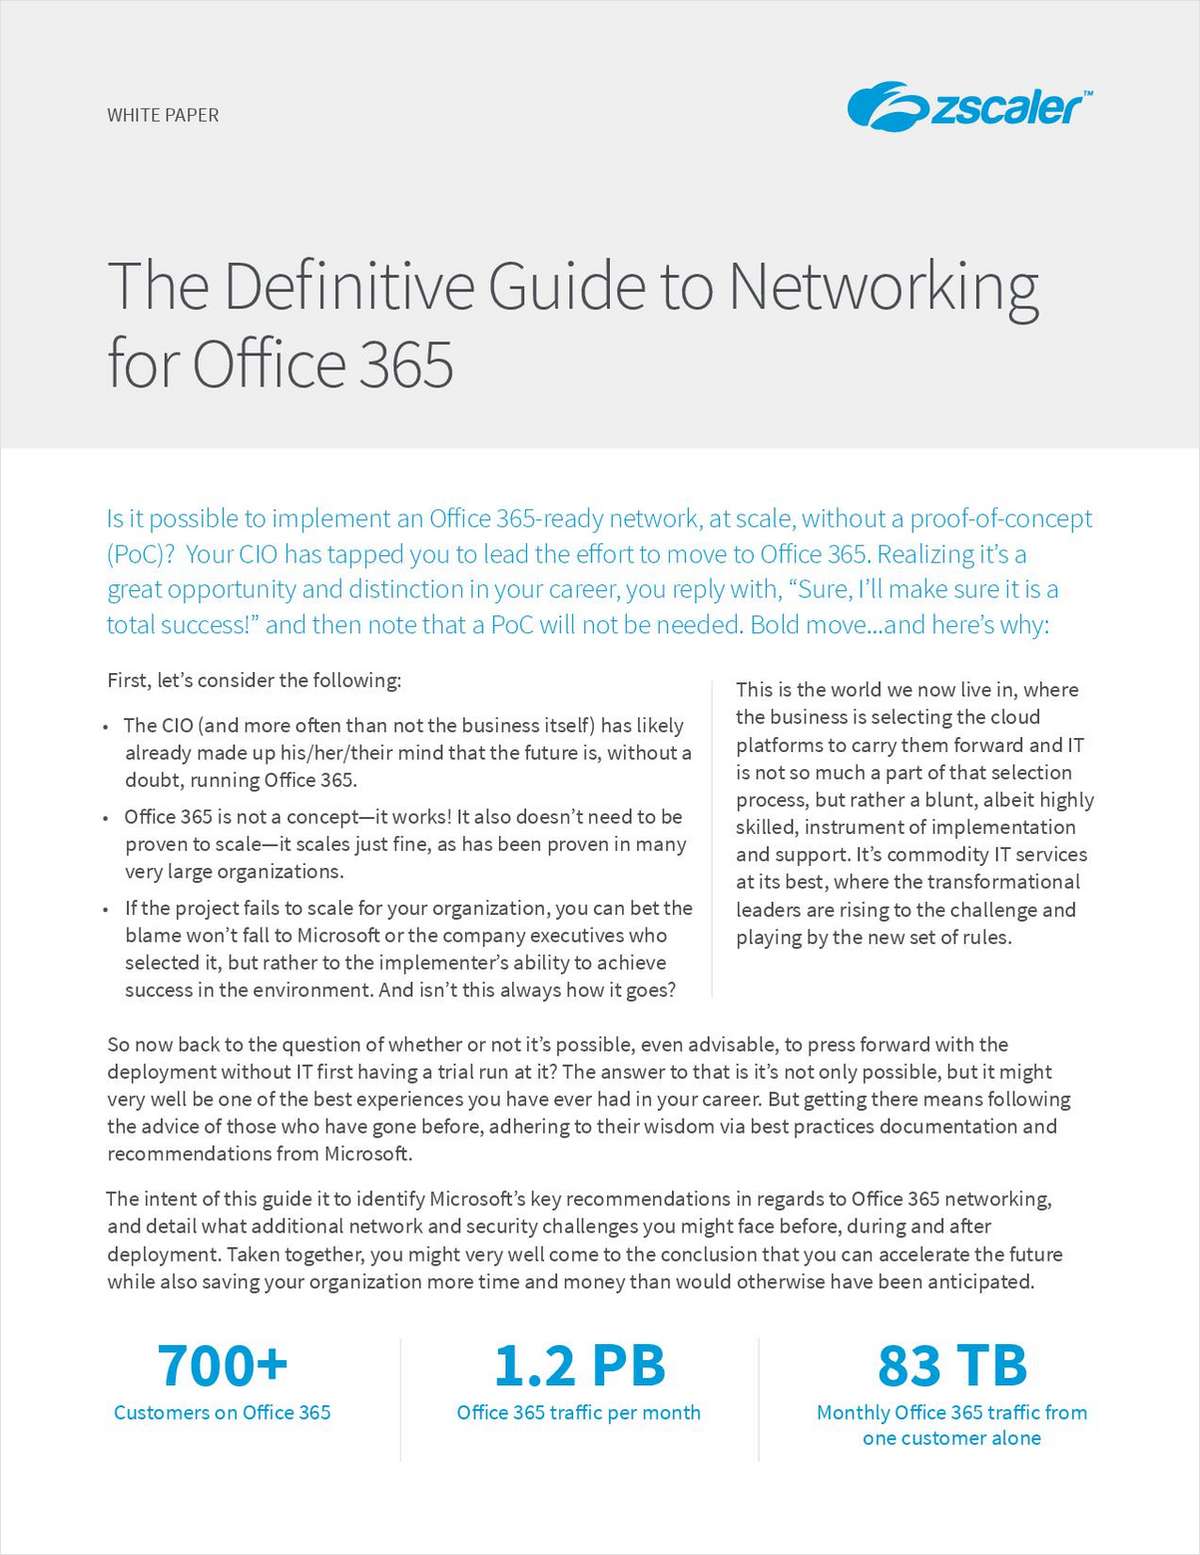 The Definitive Guide to Networking for Office 365